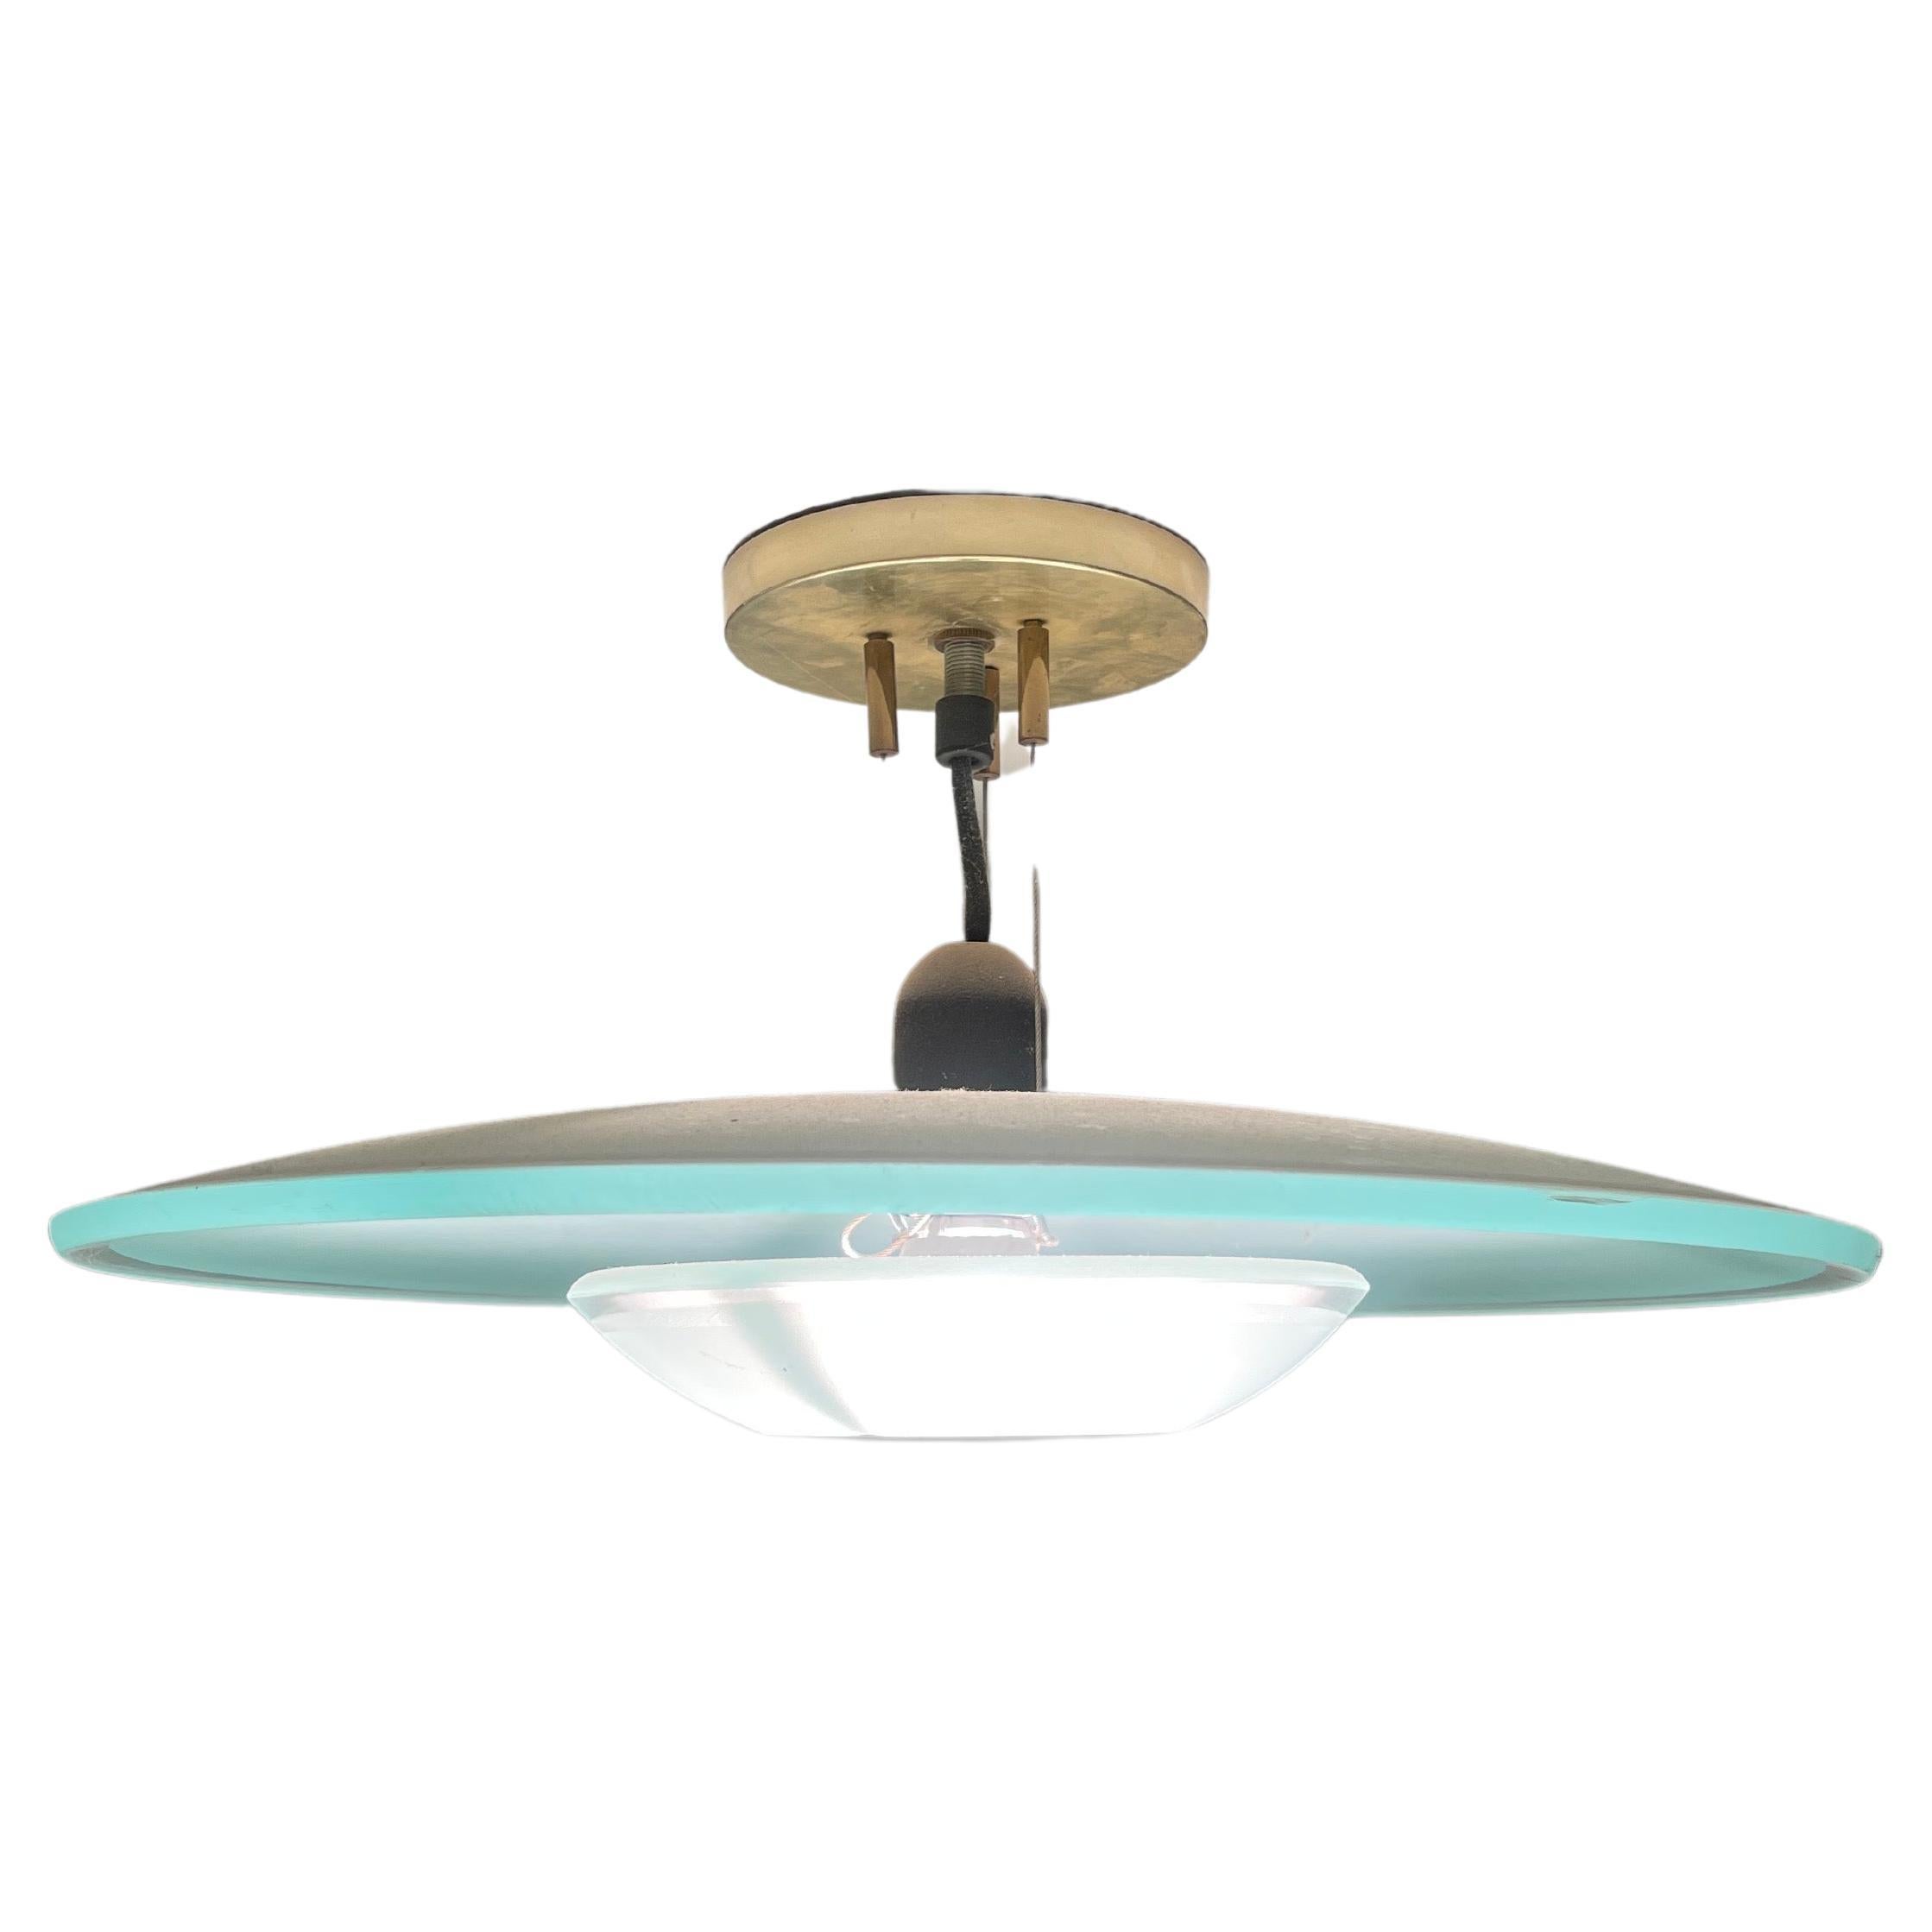 Wonderful Mid-Century Modern Art Deco Lightoiler Glass Hanging Pendant Fixture In Good Condition For Sale In Roslyn, NY